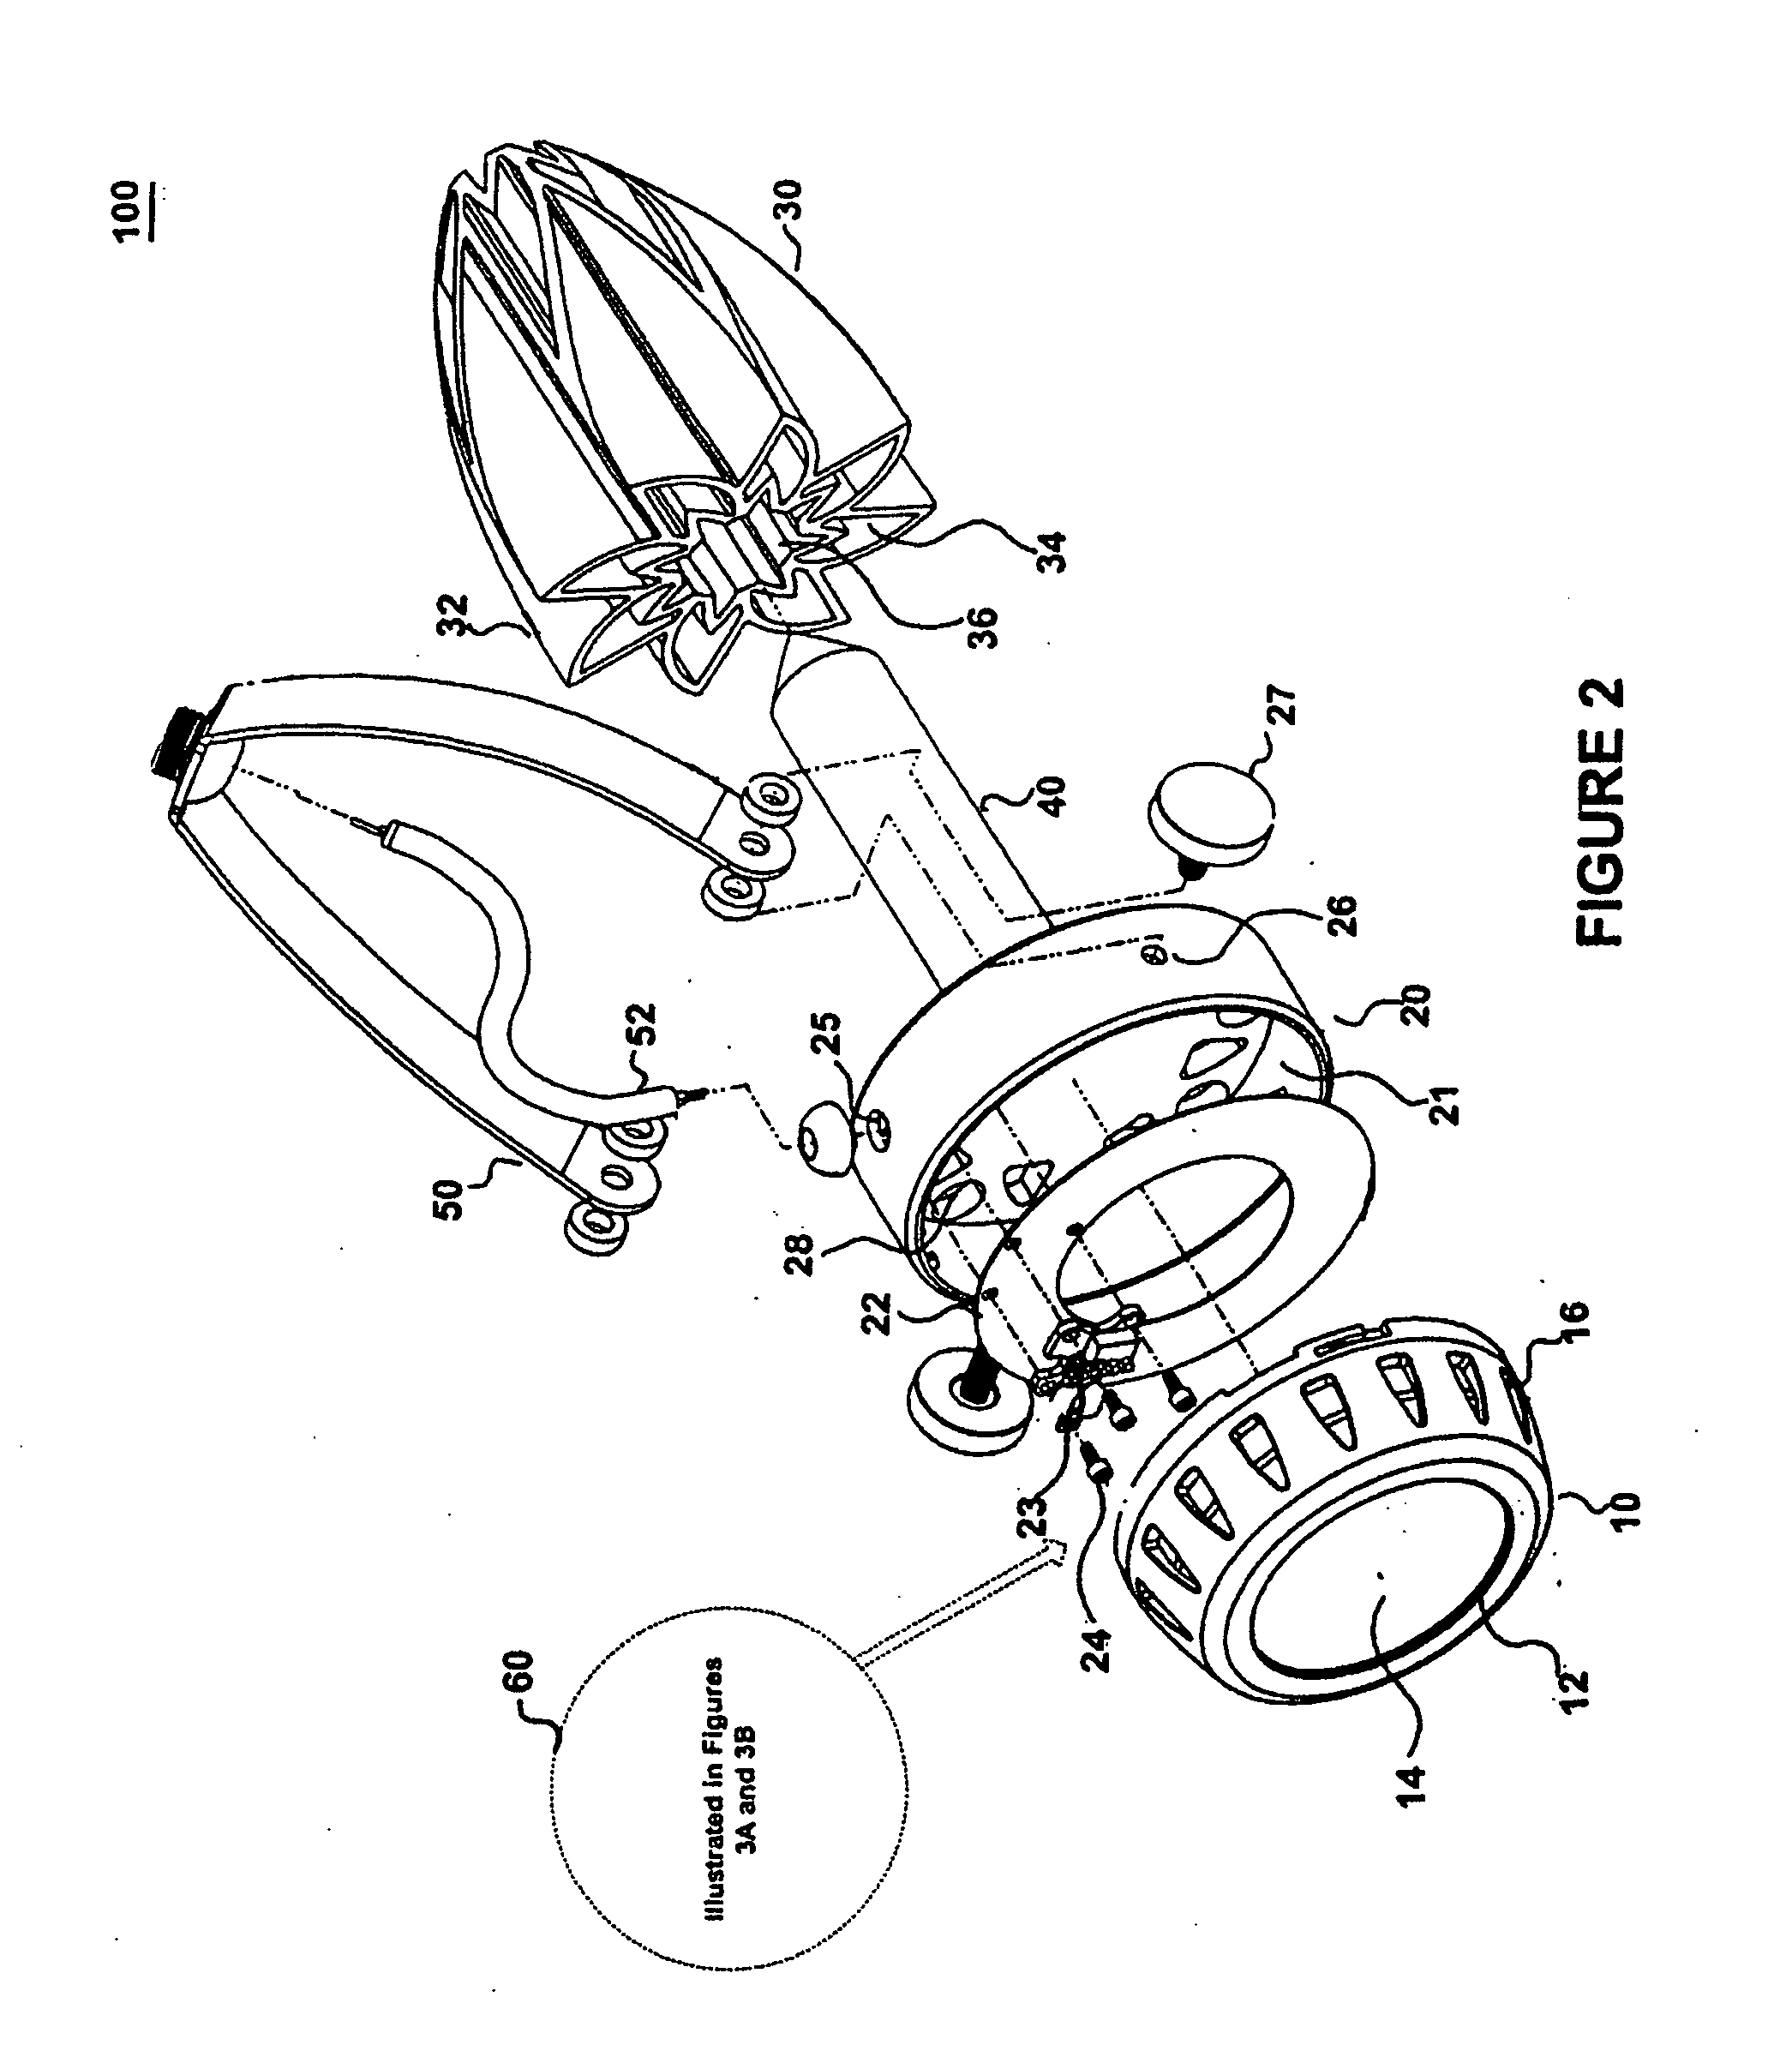 Lighting assembly having a heat dissipating housing